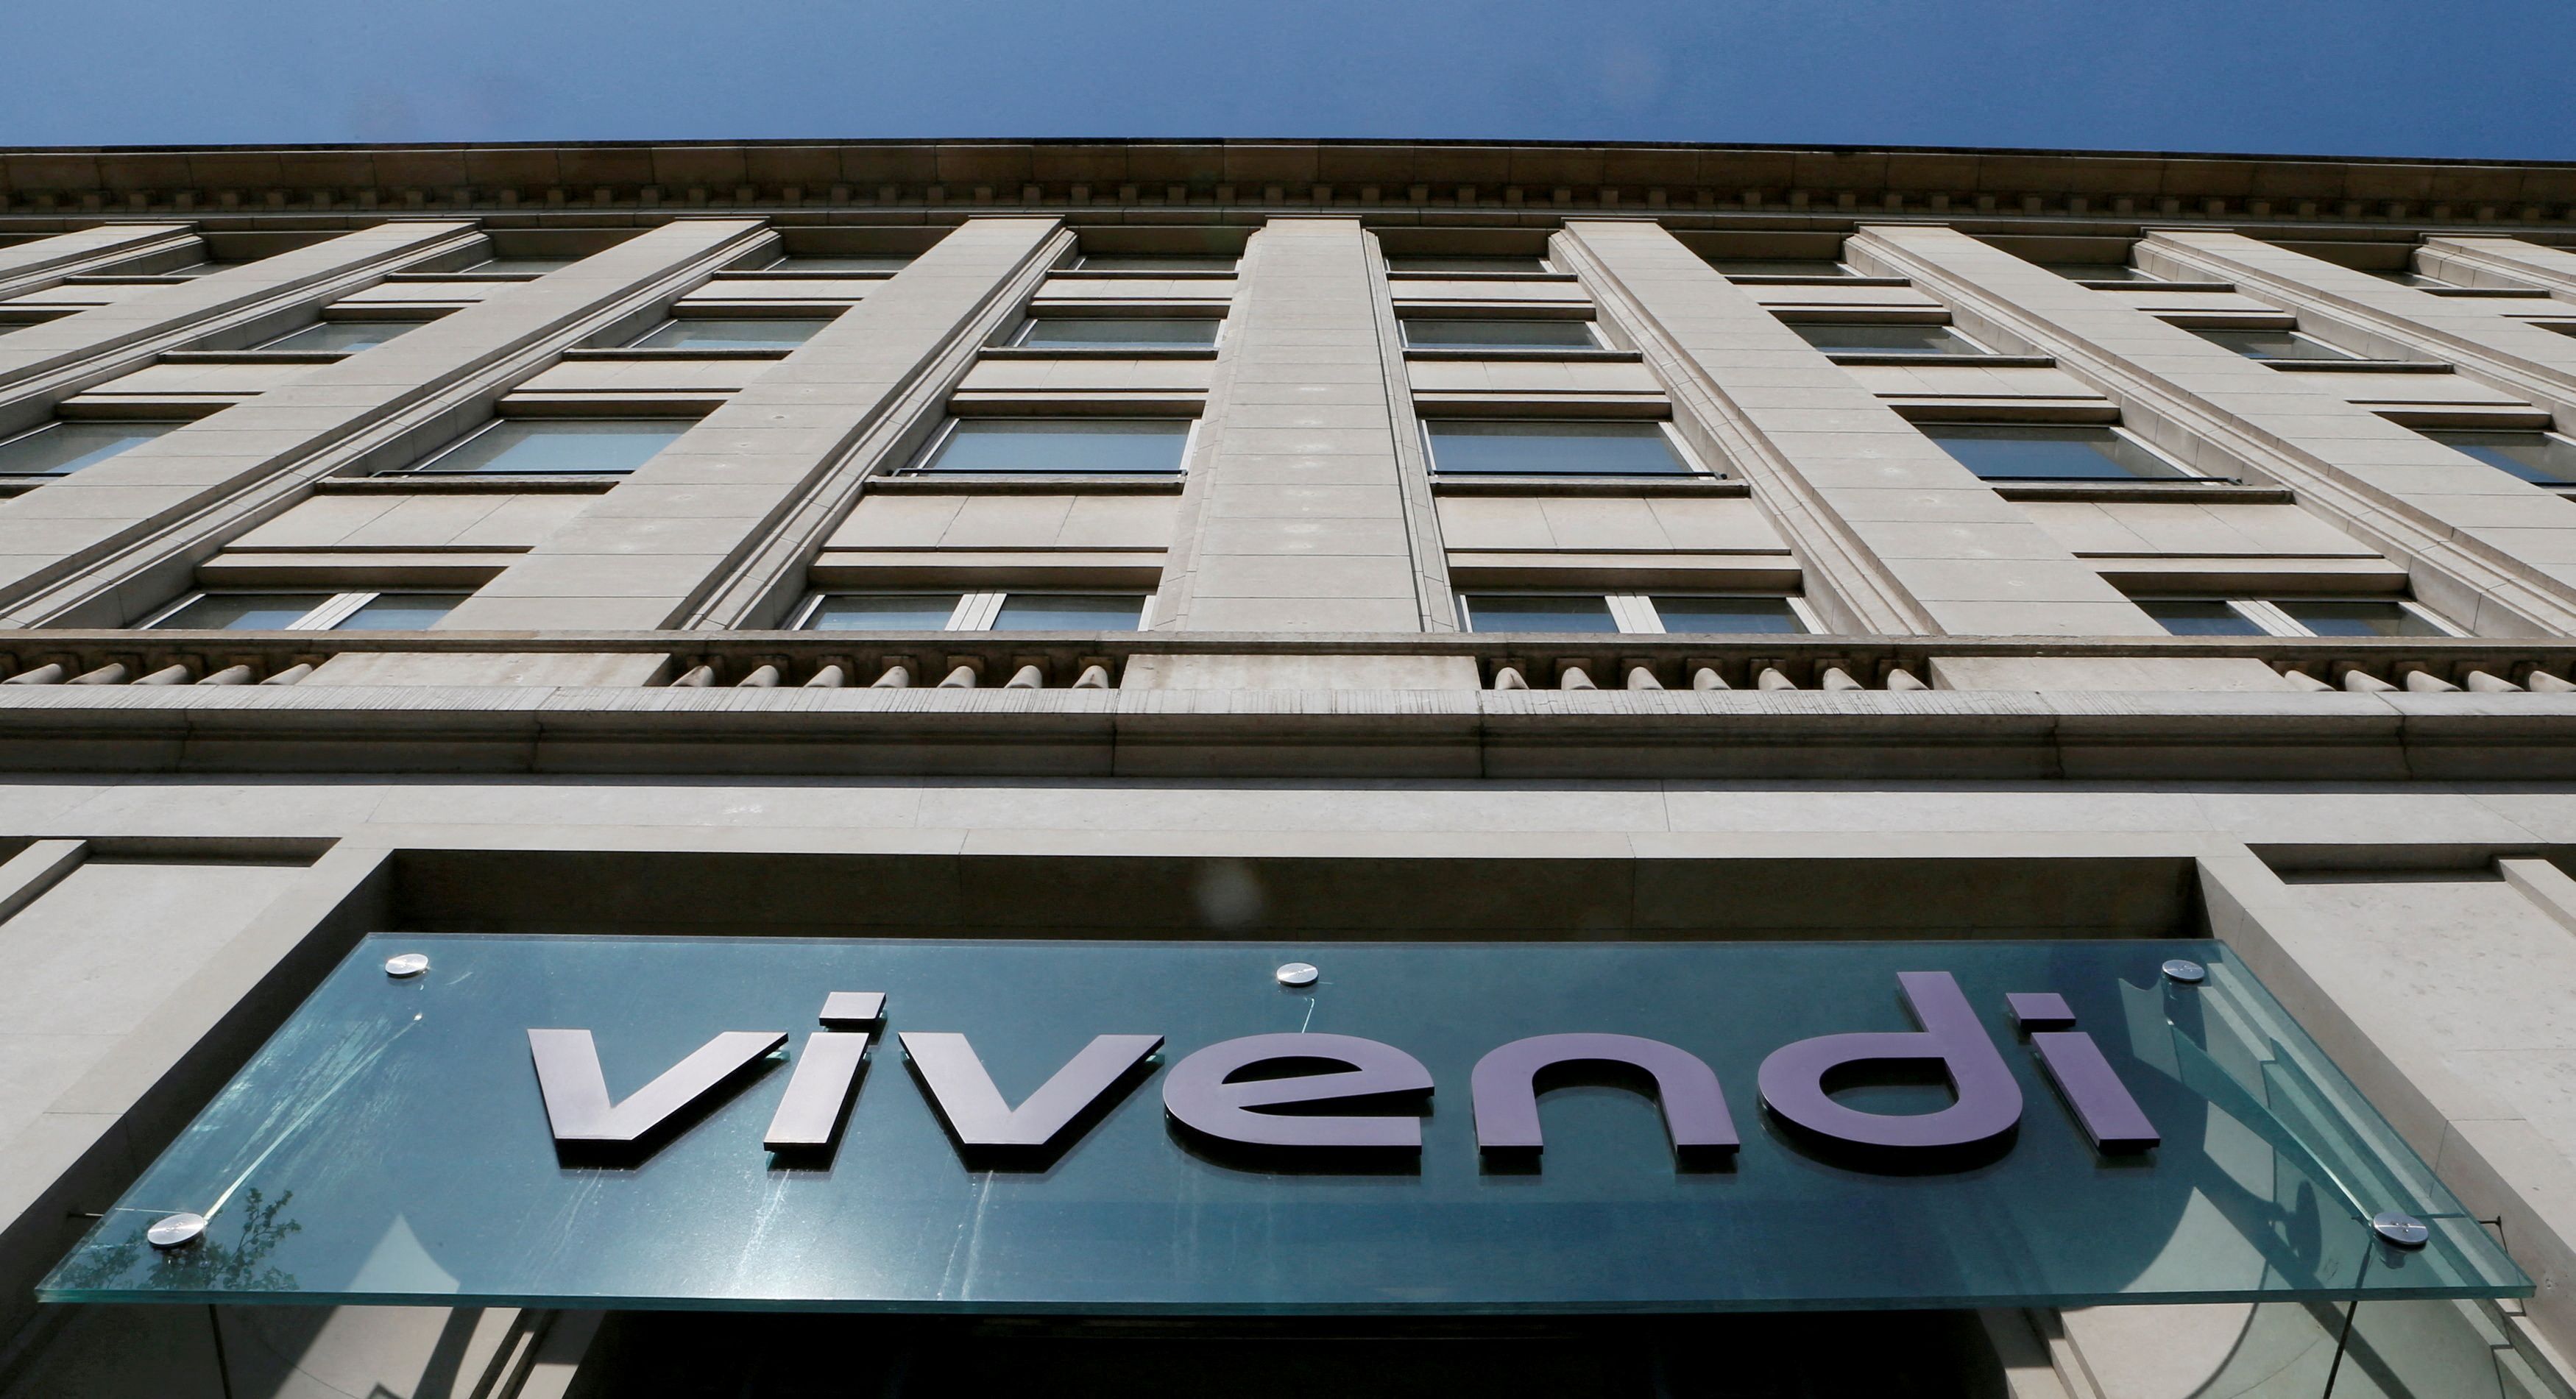 A Vivendi sign at the main entrance of the company's Paris headquarters